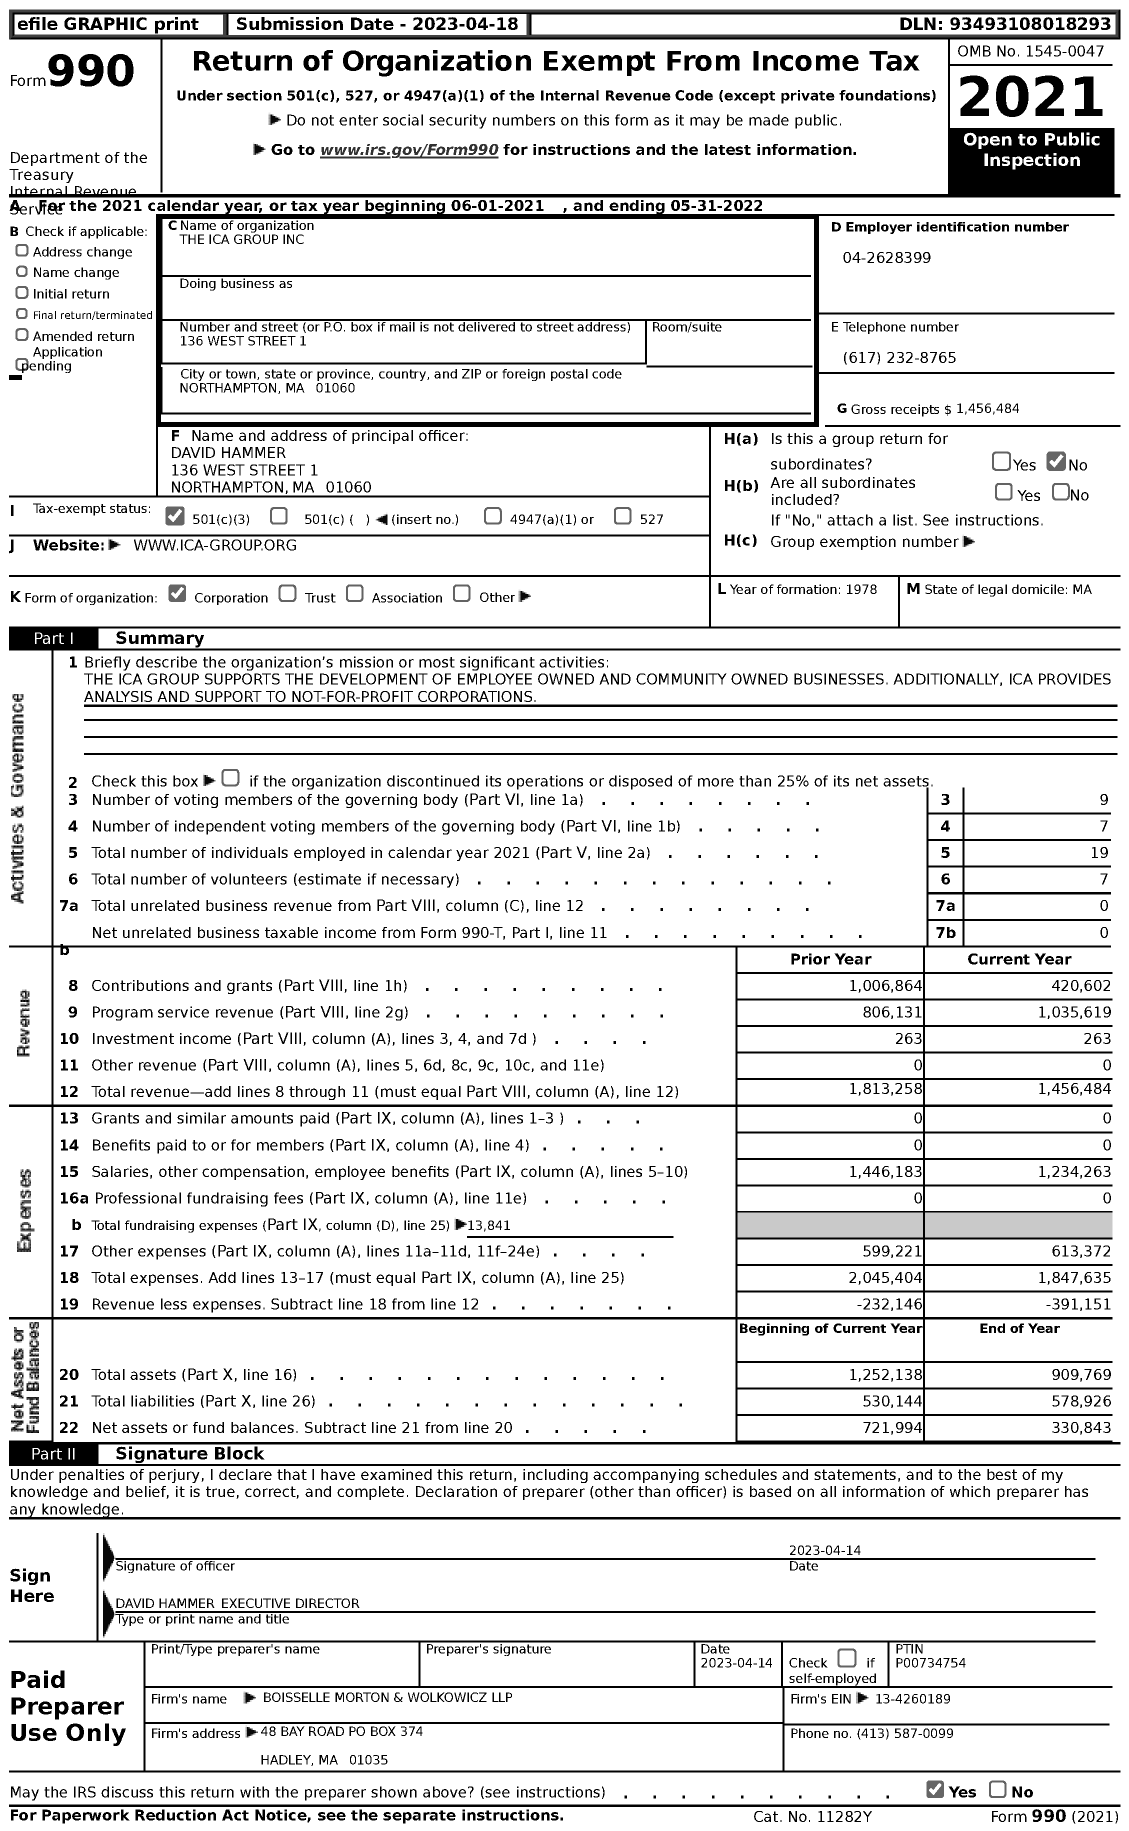 Image of first page of 2021 Form 990 for The Ica Group